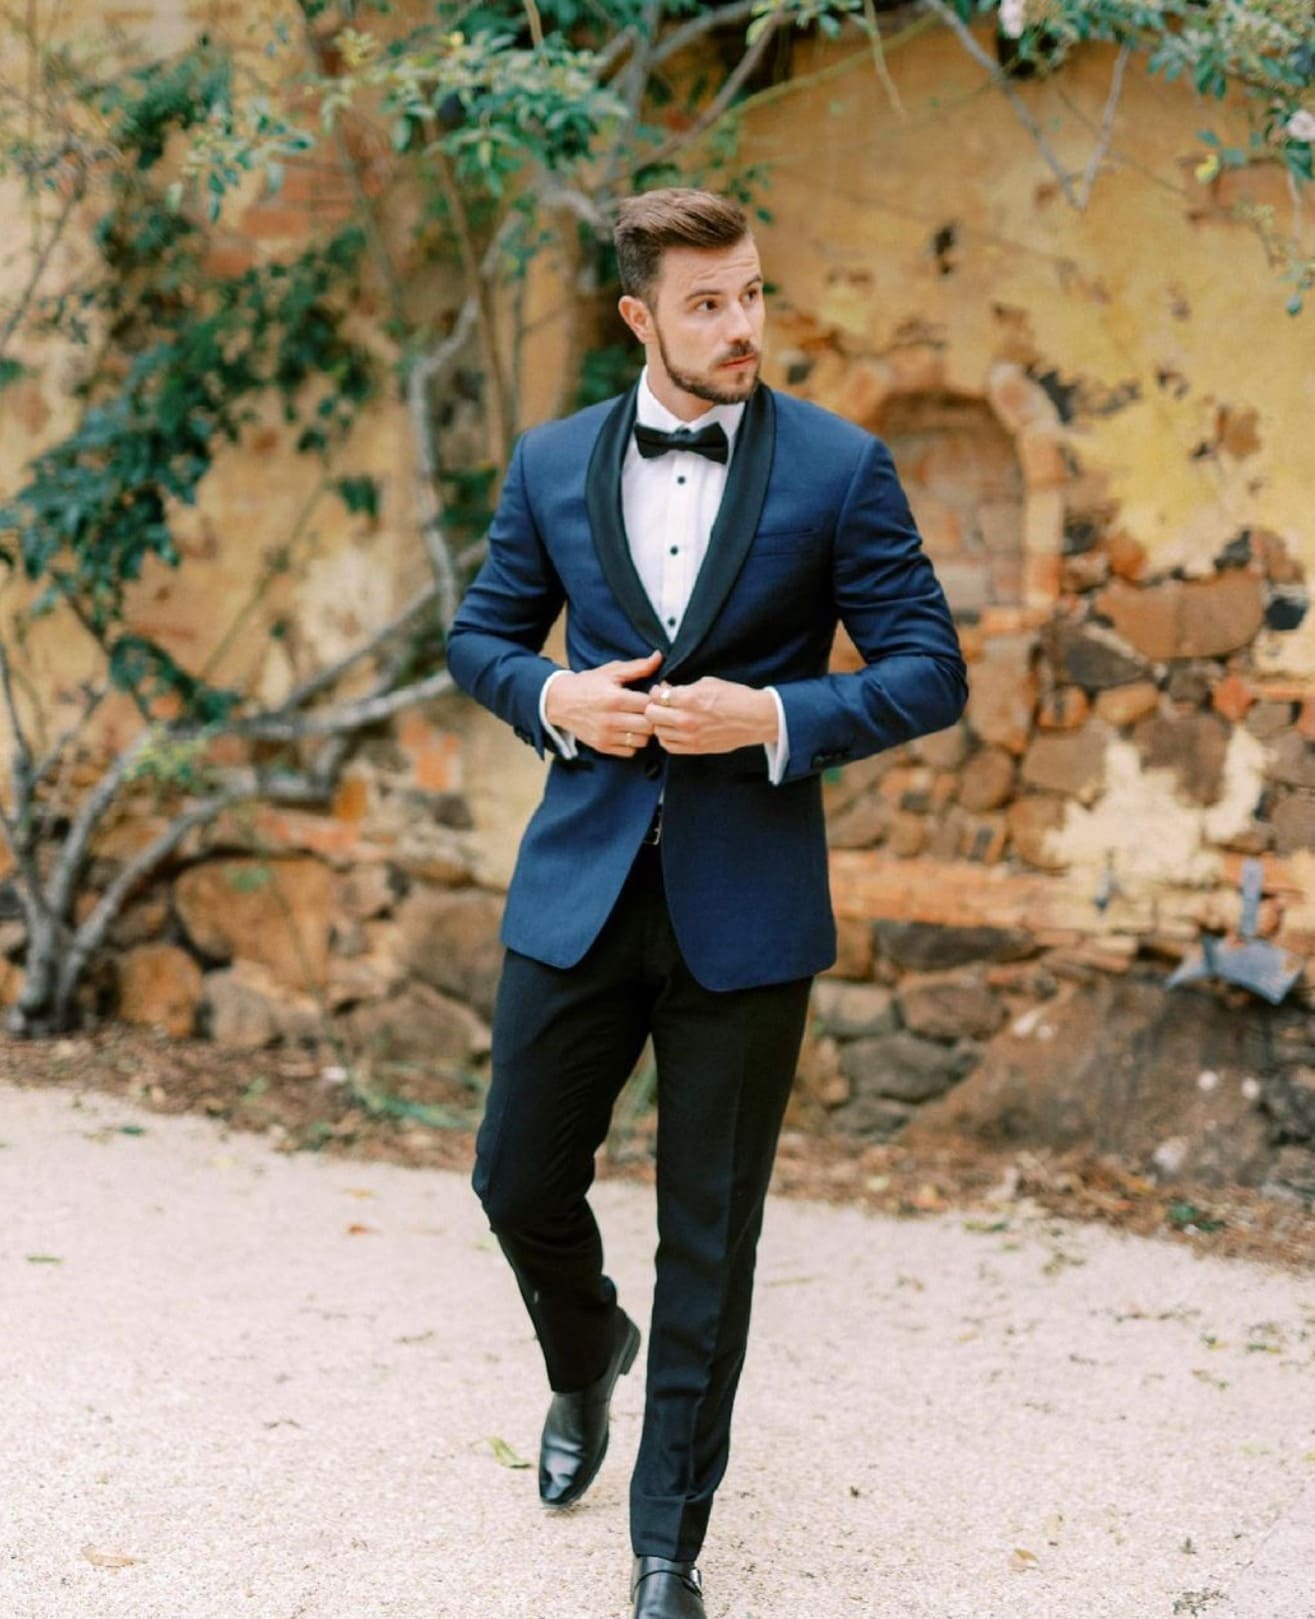 What Should a Man Wear to a Wedding: The DOs and DONTs - Oliver Wicks